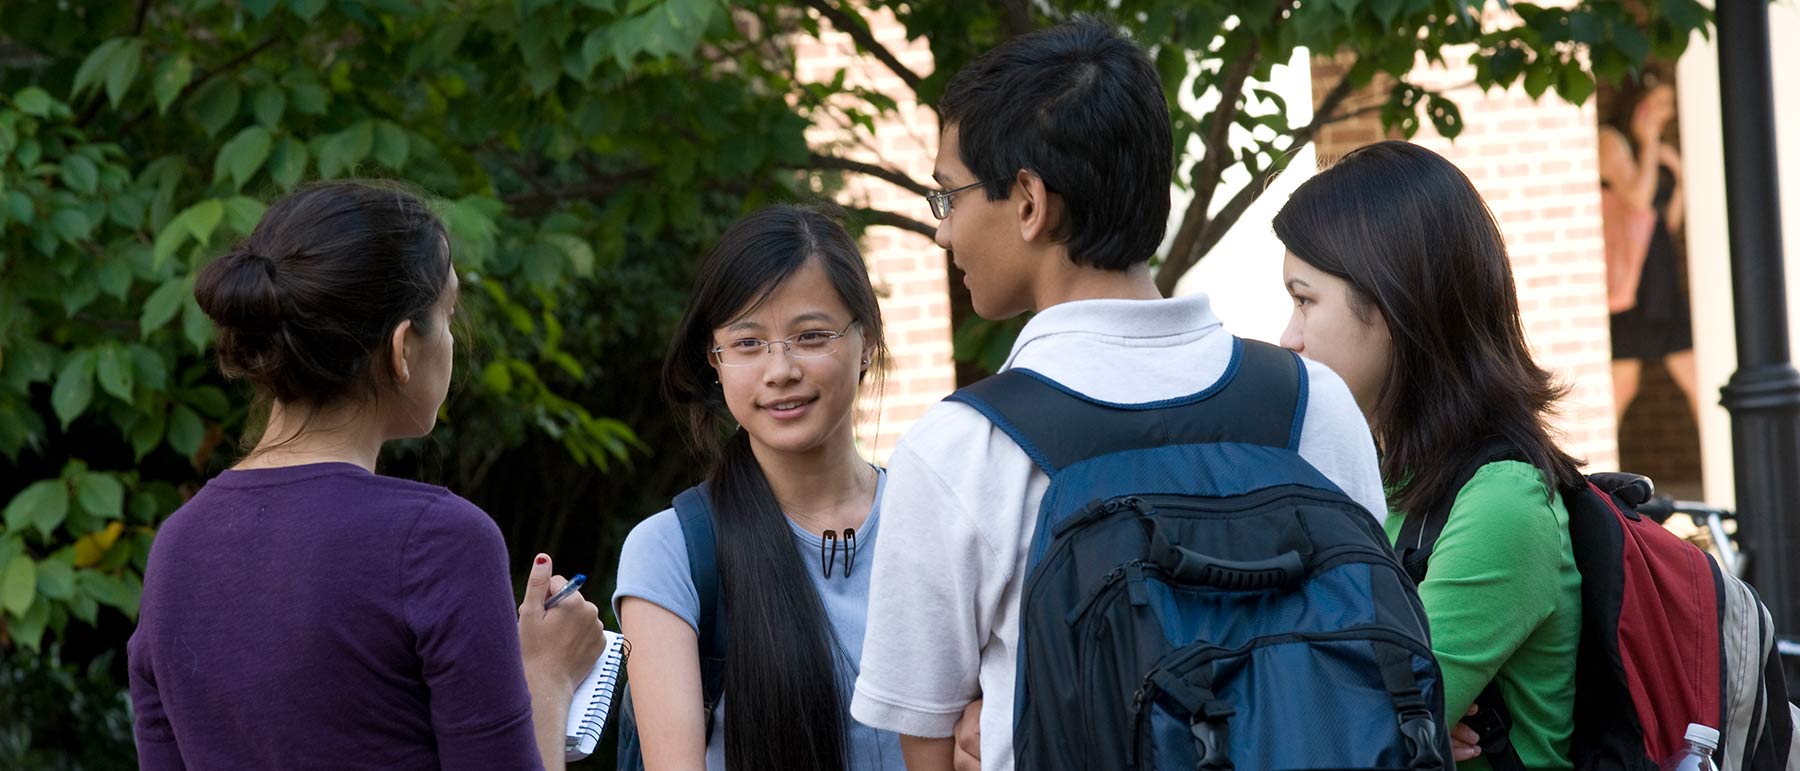 A student journalist interviewing a group of students.